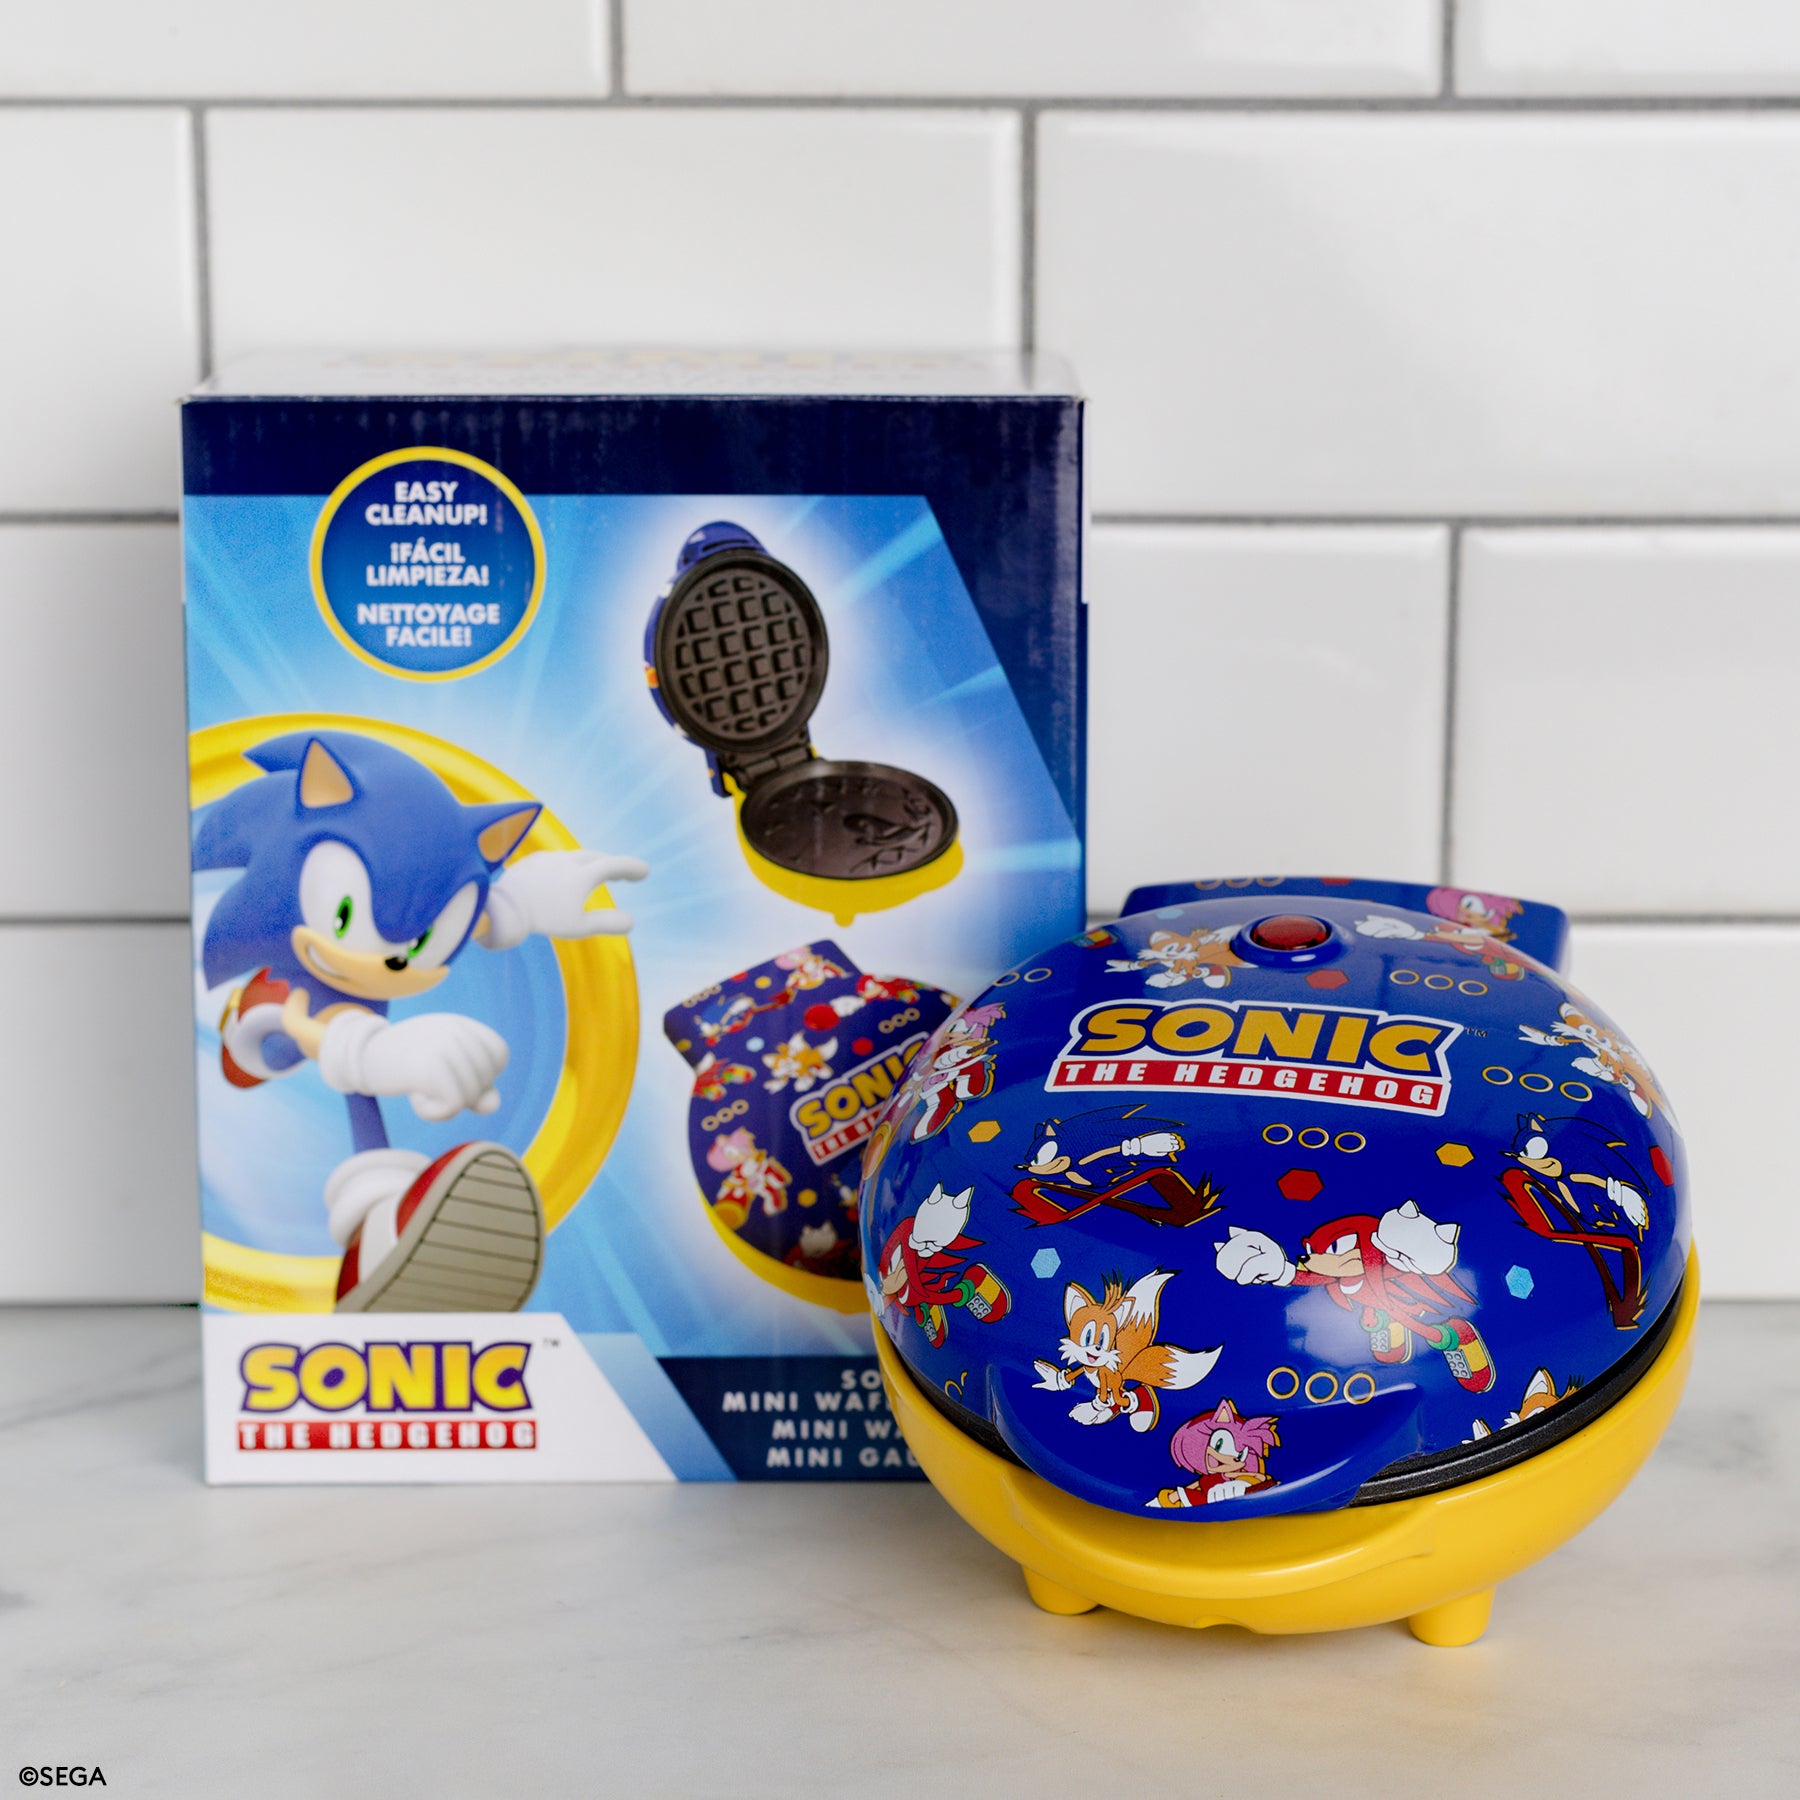 SEGA of America and Uncanny Brands Debut the Sonic the Hedgehog™ Mini Waffle Maker